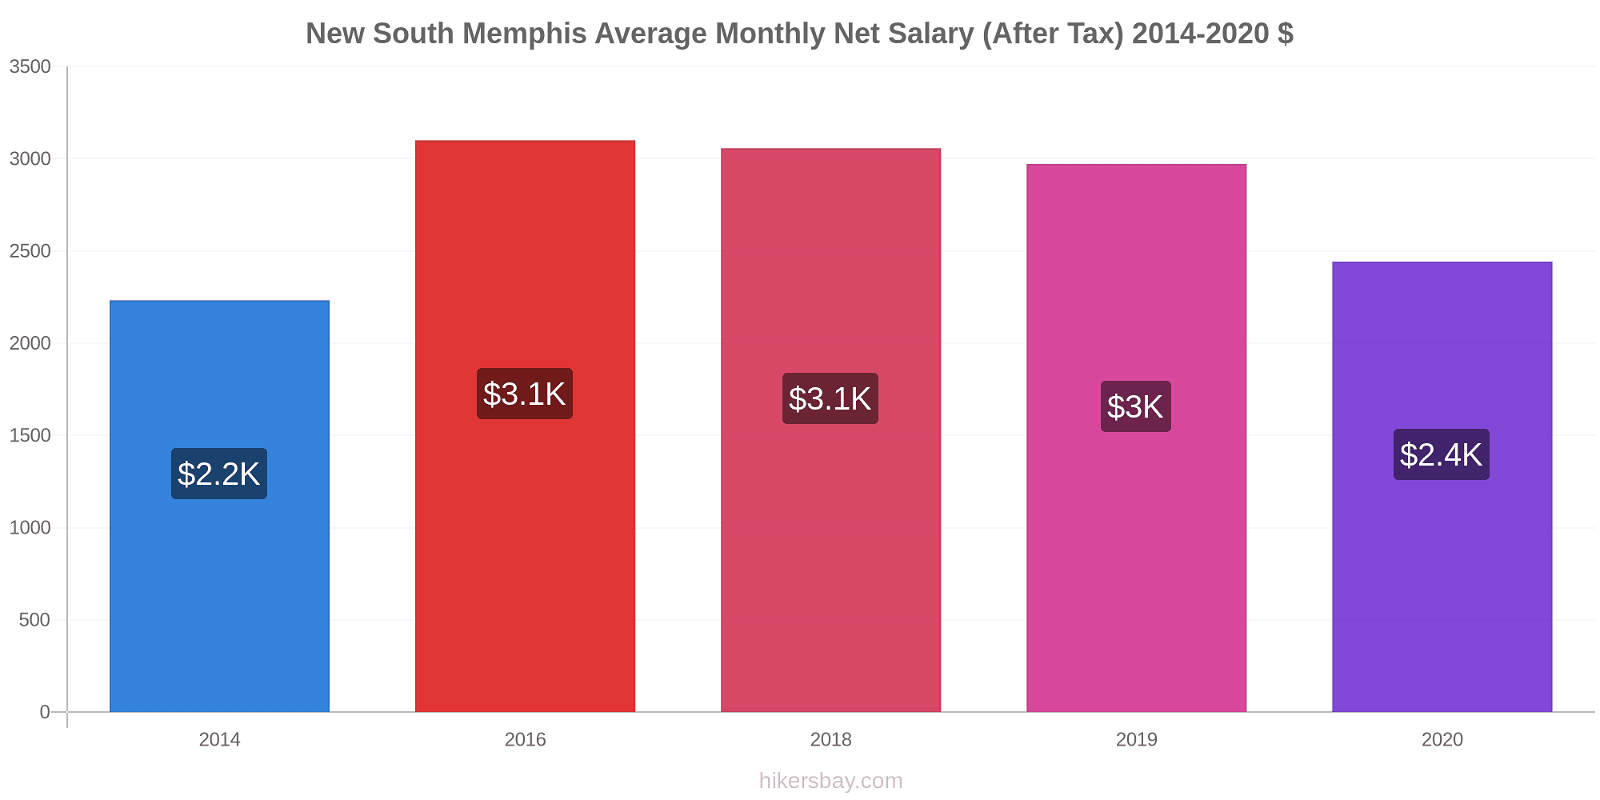 New South Memphis price changes Average Monthly Net Salary (After Tax) hikersbay.com